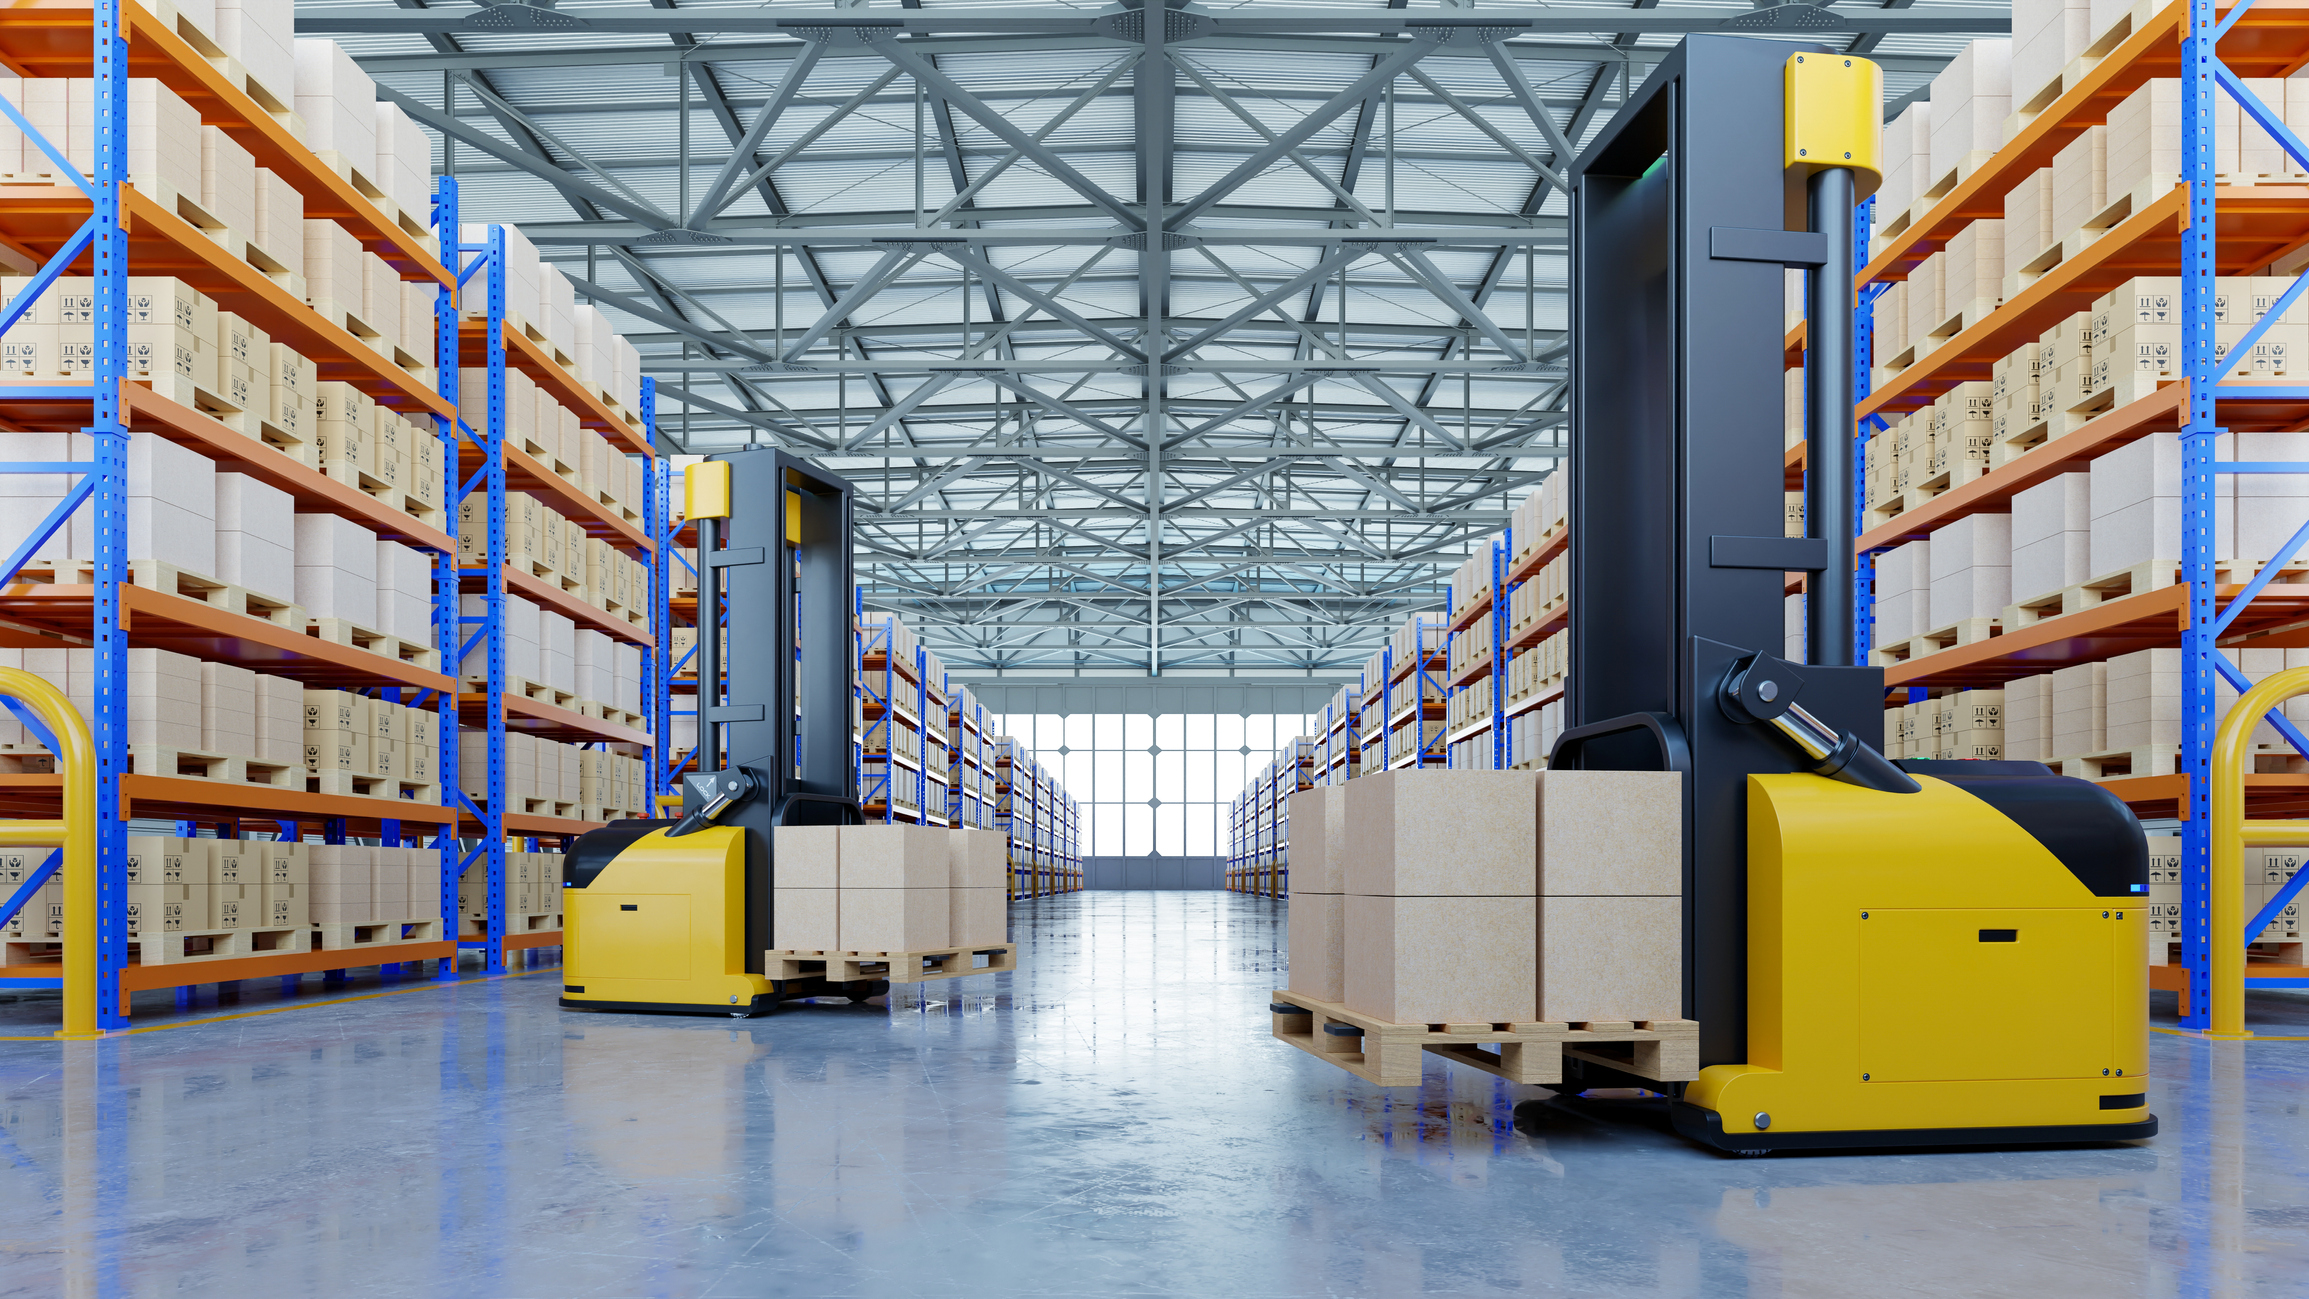 Modern warehouse with AGV forklifts and high shelves.